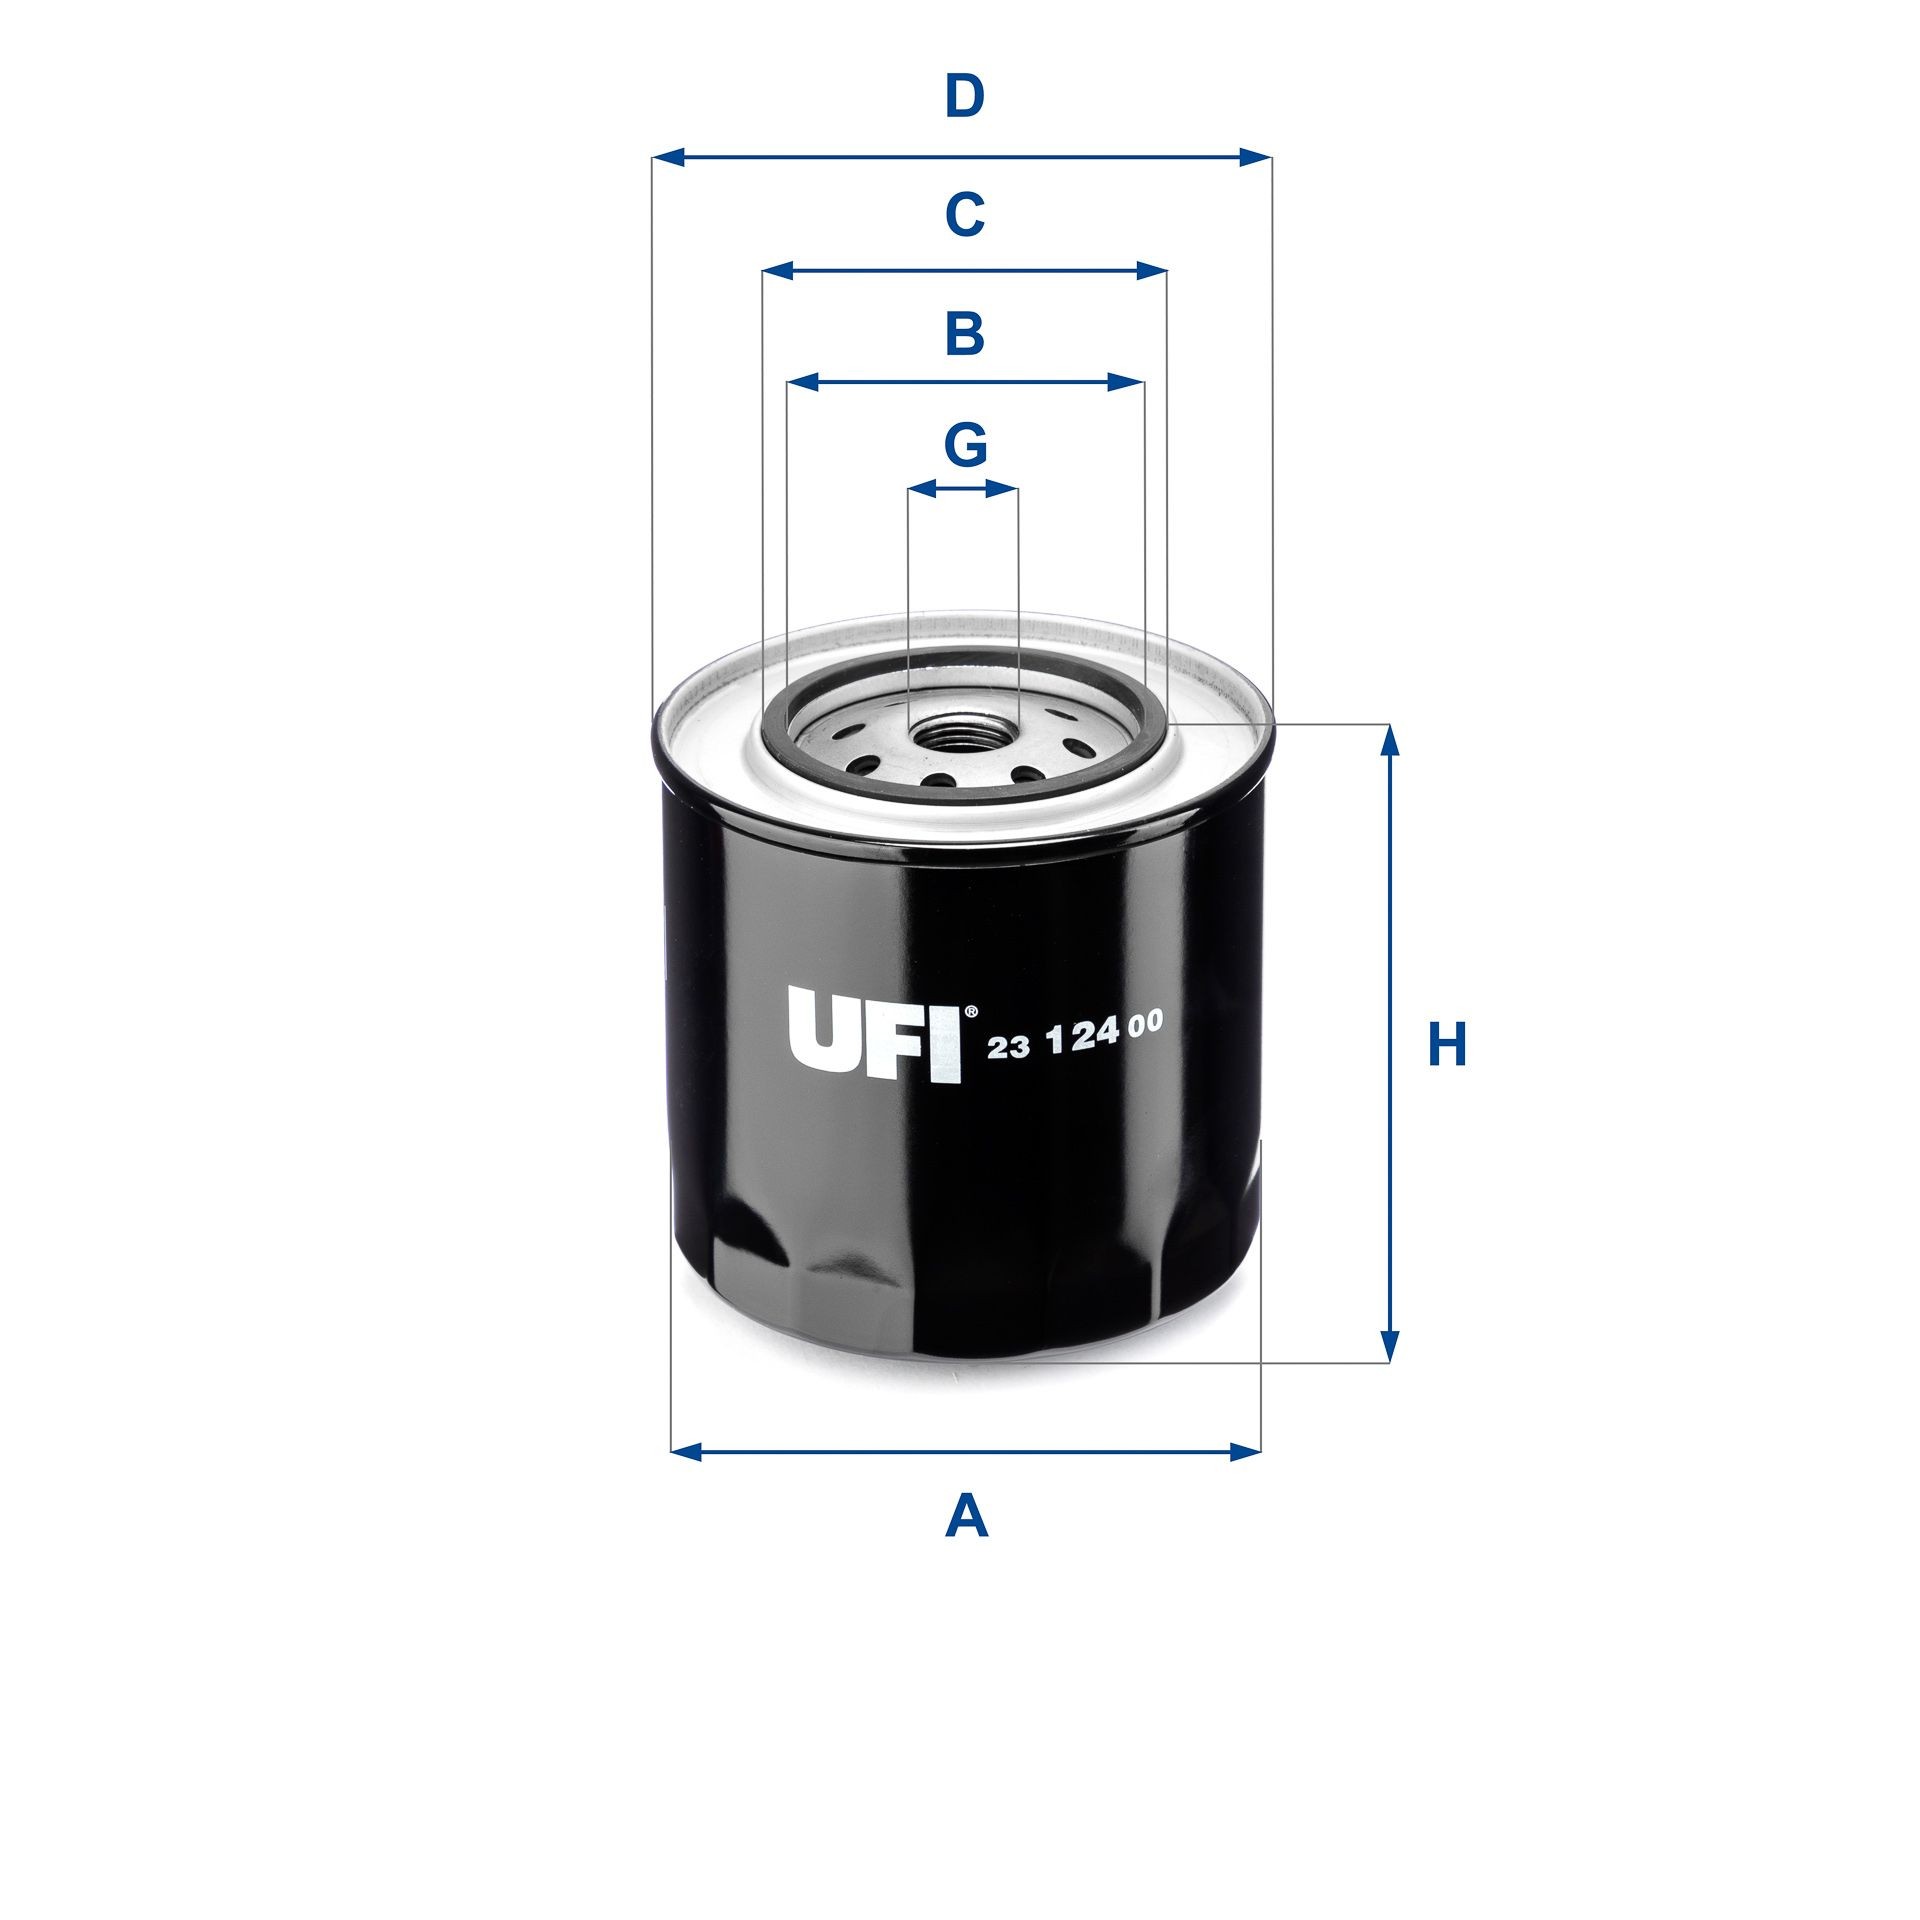 23.124.00 UFI Oil filters NISSAN 3/4-16 UNF, with one anti-return valve, Spin-on Filter